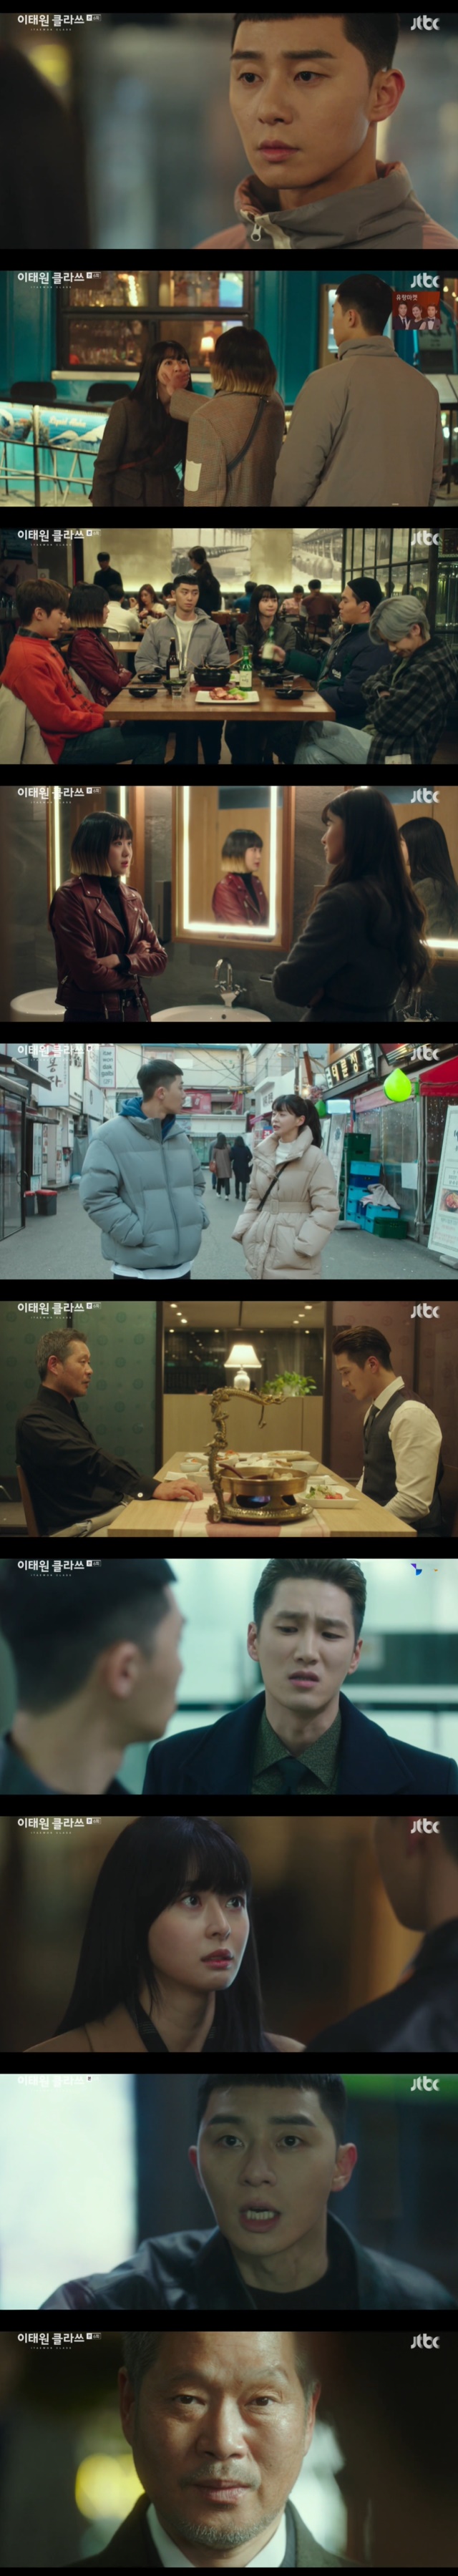 Park Seo-joon and Yoo Jae-myung reunited.In the 6th episode of JTBCs Golden Earth Drama Itaewon Klath (playplayplay by Cho Kwang-jin/director Kim Sung-yoon) broadcast on February 15, Jang Dae-hee (played by Park Seo-joon) who came to see him blow up was drawn.Oh Soo-ah (Kwon Nara) tried to kiss Roy, who rather comforted himself by saying harsh words to hurt him.Joe-yool Lee (played by Kim Dae-mi) fought back, blocking Oh Soo-ahs mouth, and provoked Oh Soo-ah to go to a dinner party at night.Joe-yool Lee followed Oh Soo-ah, who went to the bathroom, and asked why he lied about reporting a business suspension. Oh Soo-ah said, What does it matter?I dont like the new Roy, Joe said, but Joe-yol Lee said he liked the new Roy and said he did anything to get what he wanted.Joe-yool Lee warned Oh Soo-ah, who says he likes him, Then I cant help it, Im going to break my sister. Oh Soo-ah said, Try.Its fresh, he said, not insignificant.Jang Dae-hee learned through Oh Soo-ah that Jang Geun-soo (Kim Dong-hee) is working at a single night and that the single night is growing rapidly.When asked how he was looking at Roy, Oh Soo-ah said, Roy is reckless and stupid. It is soft and hard.I think its a good idea, and I think its a good idea. If you set your goal, itll slow you down, but itll definitely go on.The employees are confident in their good looks and inclusiveness, he said, adding that Roys goal is to think of the franchise as a brand of night.Joe Jung (Kim Yeo-jin) was angry when he found out that Joe-yool Lee was working at a single night without registering for college even after passing the senior exam.Joe-yool Lee told his mother, Min Jung, who even packed a bag and kicked it out, Im different from her. Smart and good.I can achieve my love and success. I do not lean on my dreams, I do not carry my mothers dreams.The jogger, Roy, confronted Joe-yool Lee, who left the house.When asked why he didnt go to college and work at night, Park said, I need you, and impressed Joe-yol Lee.Joe-yool Lee promised to achieve the dream of becoming a franchise together, saying, There is a saying that the size of the dream sets the bowl of the person.Oh Soo-ah, who happened to meet Park, mentioned Parks words that he should be faithful to his life and said that he will live as a long-term person in the past.Oh Soo-ah distanced himself from me, saying, Thank you so much for all this time, dont really like me anymore.Joe-yol Lee, who chose Kimtoni (Chris Ryan) as a part-time student for an increased number of customers, has been pushing for the strongest car.Then, when he went to a meeting with the crew, he met with Jean Bo-hyeon.The Fountainhead revealed that he liked Oh Soo-ah and said, What my father had to die for 10 years was a threat to a man who had only a small shop.Roy is just the sort of measure of SuAs mind. Stay with me. Who are you looking at?The show was canceled due to the tyranny of Jangga.Joe-yool Lee said that it was not Oh-ah who reported minor access to the depressed Park, recalling Jeans story that Oh-ah was struggling between Jang and himself.Im sorry to have made it difficult between me and Jangga, said Park, apologizing for being selfish.I dont care what you do to me, and I promise you Ill be a great deal of trouble, no matter what you do.Park called Lee Ho-jin (DiWitt), who had been bullied by The Fountainhead during his school days, and ordered him to invest all the funds he had in his house.Jang was greatly embarrassed to learn that Roy had invested 1.9 billion won in the market.Lee Ha-na